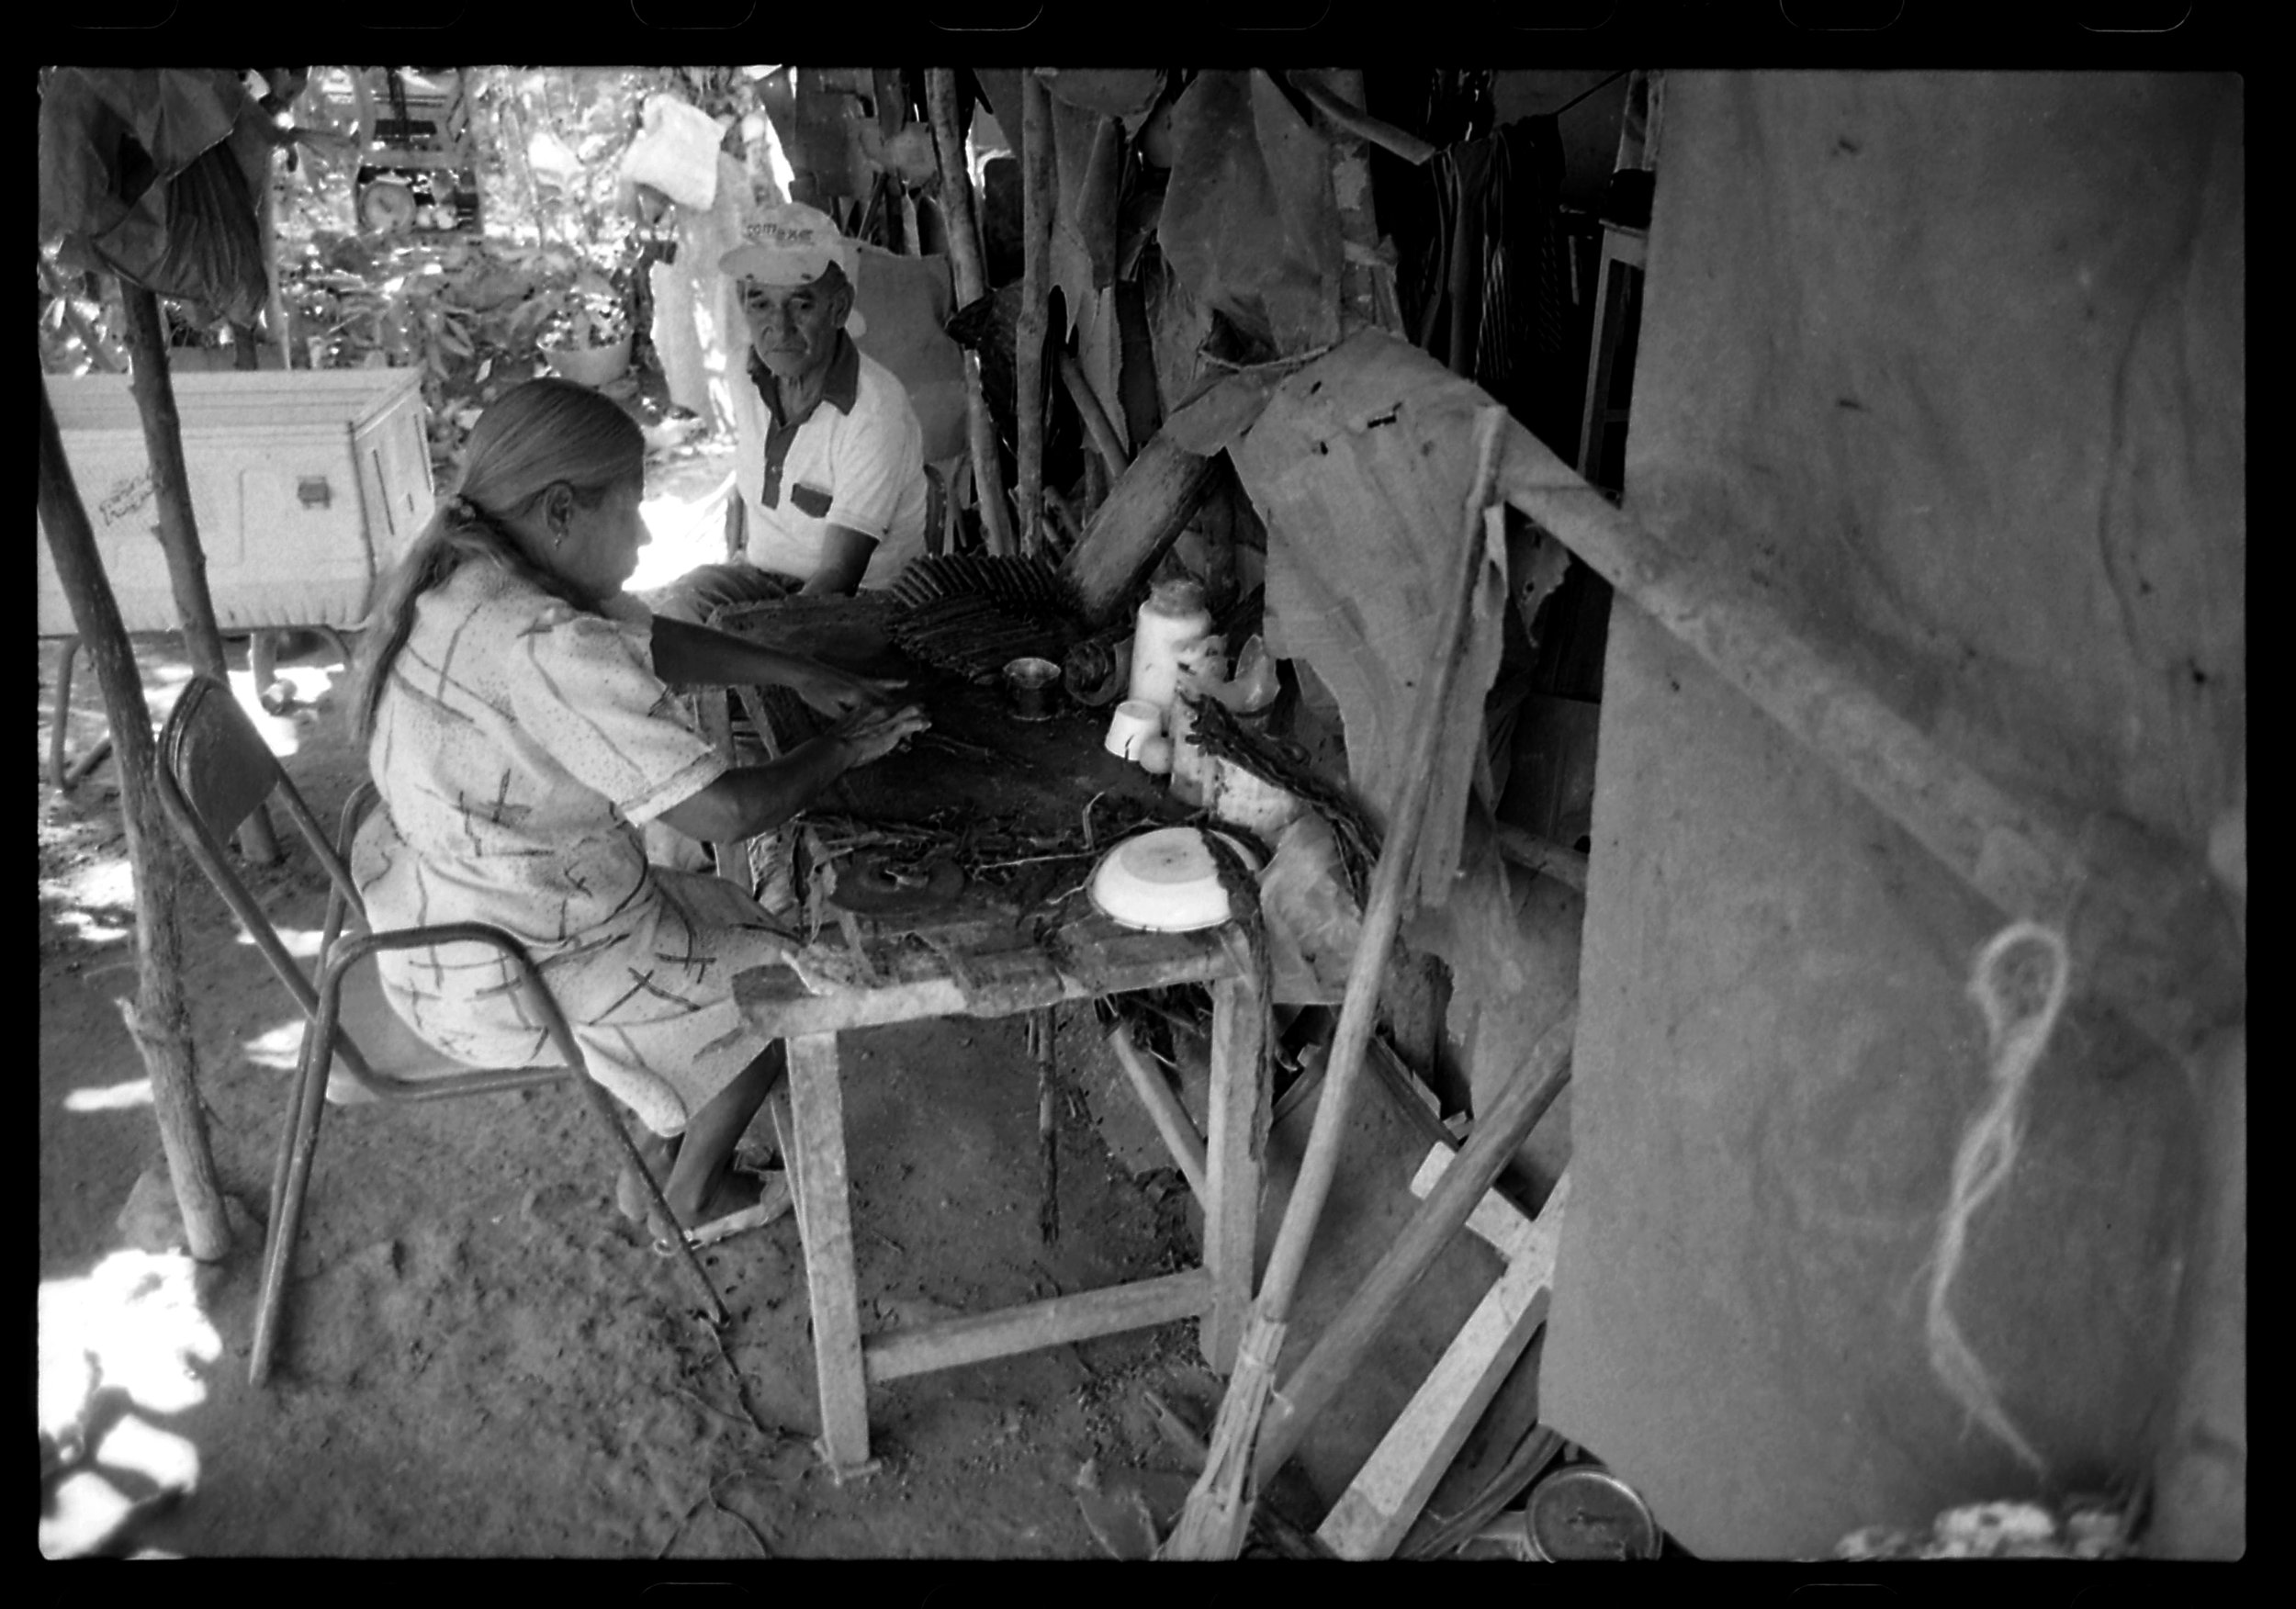  Rolling cigars at home in Simojovel, Chiapas Mexico.  This was a very important money making enterprise for this couple and their invalid mother.  1997 